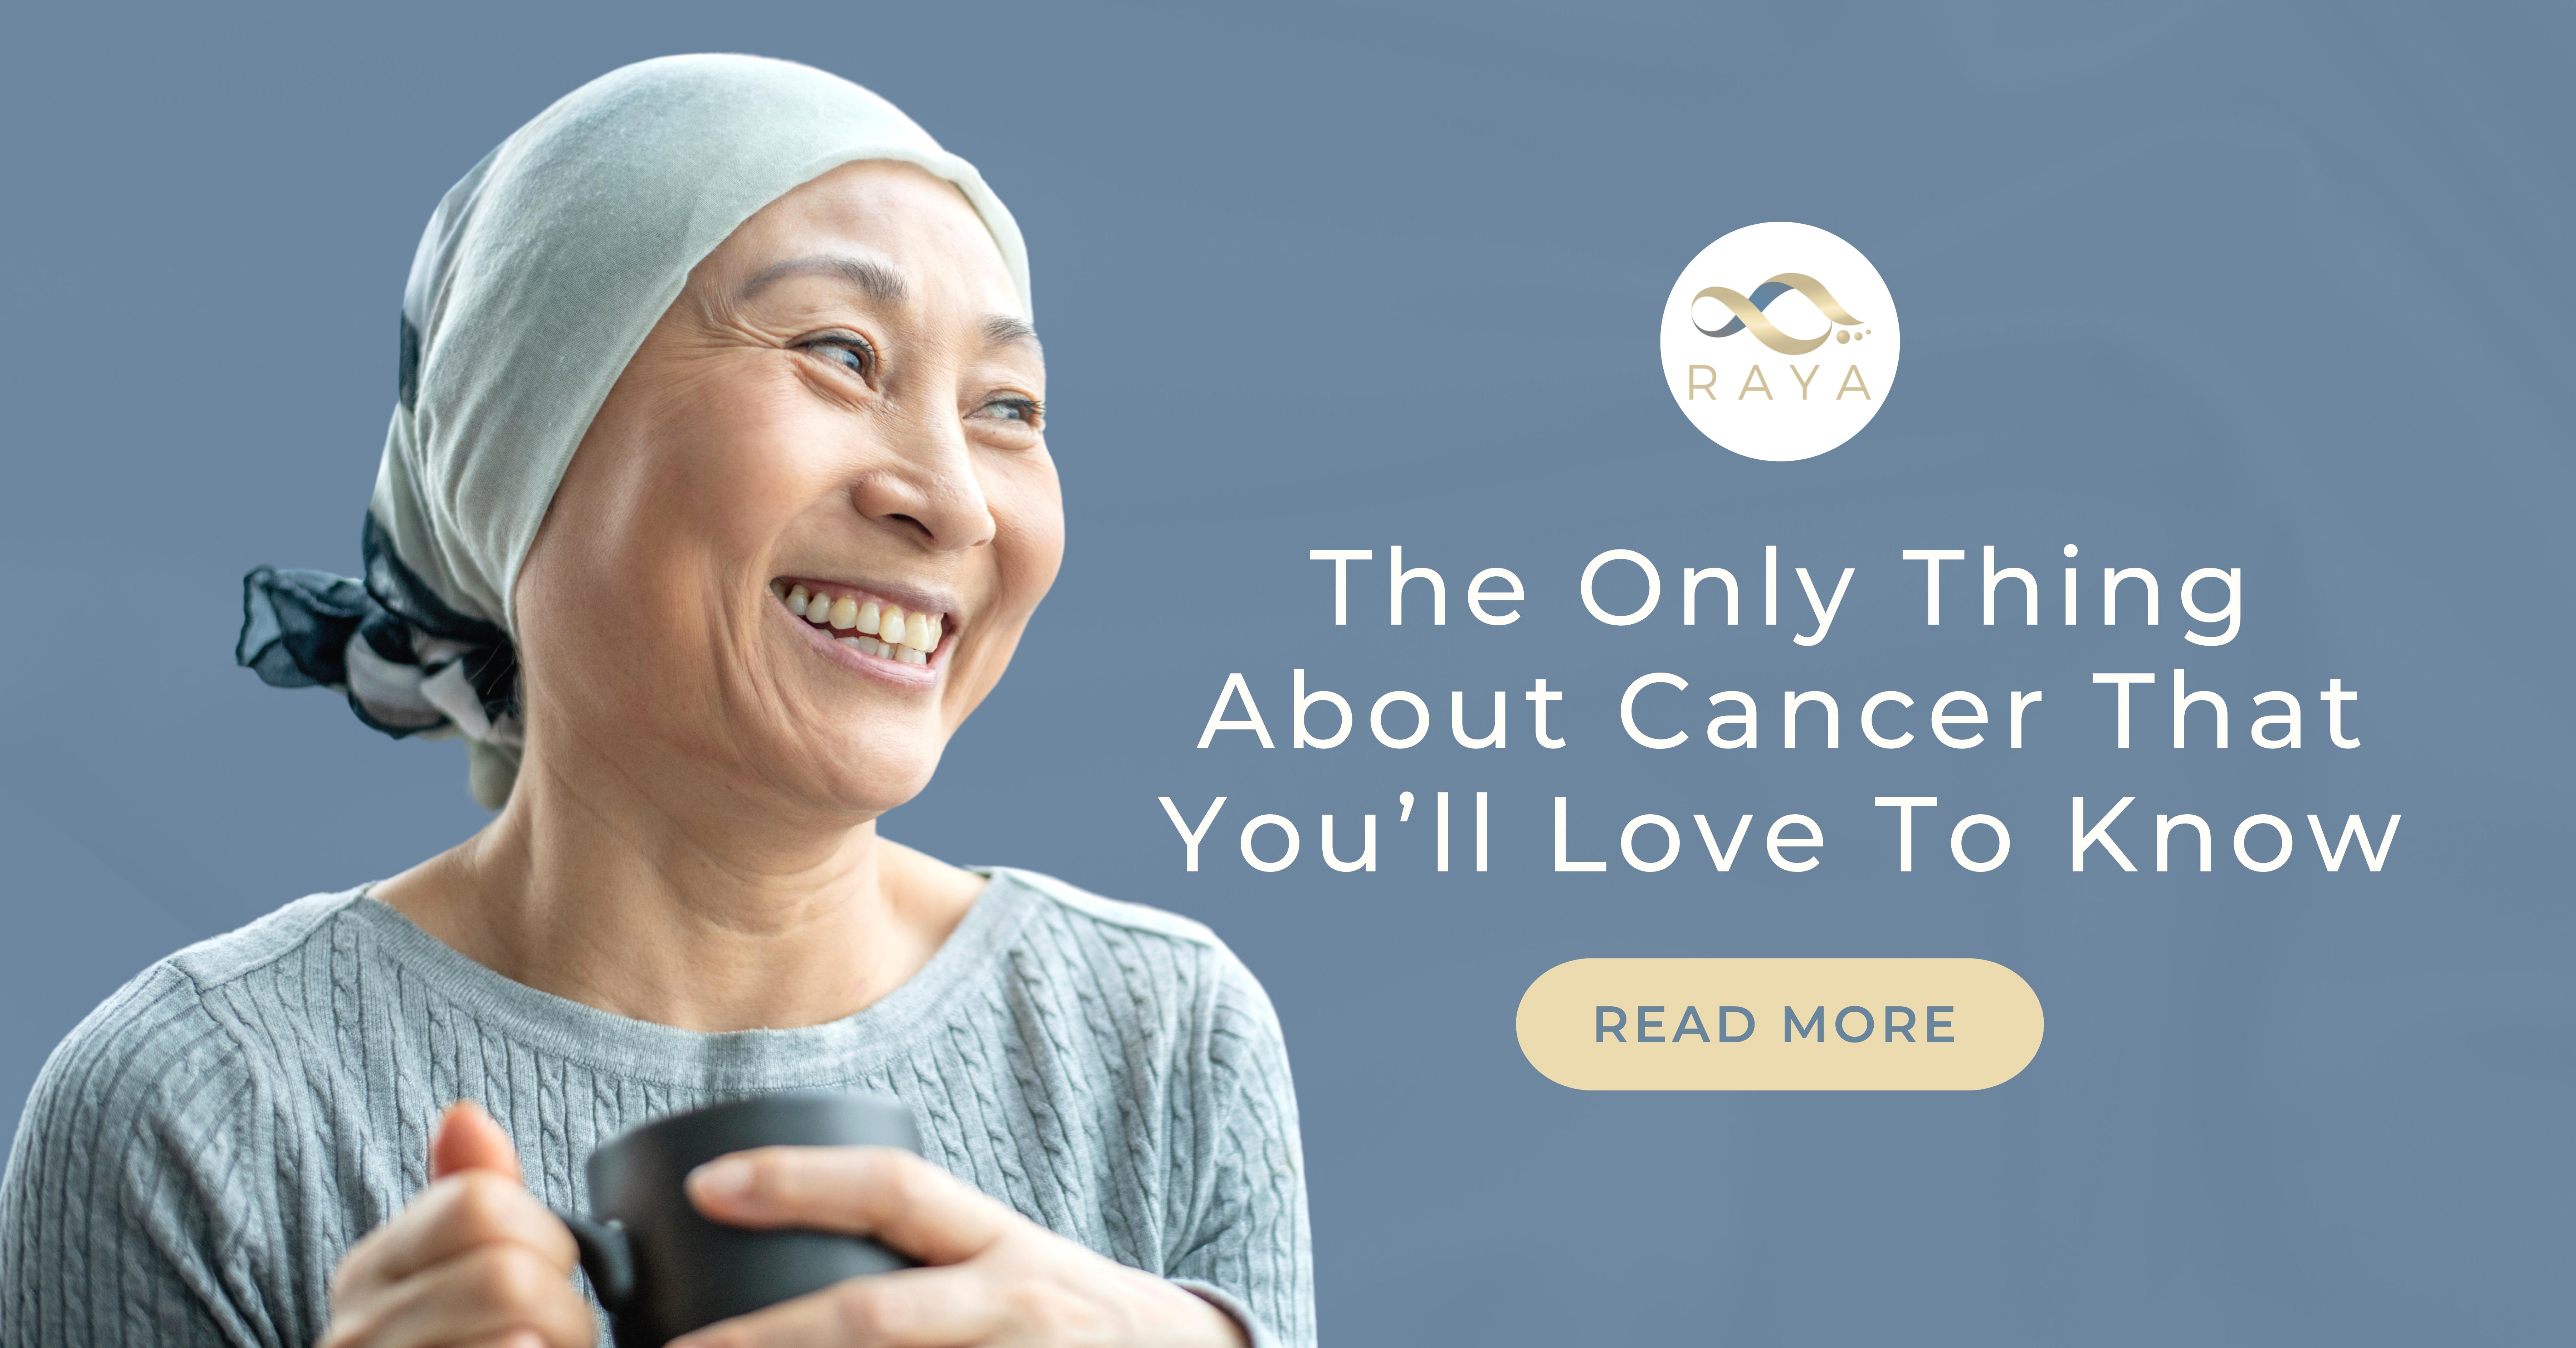 The Only Thing About Cancer That You’ll Love To Know